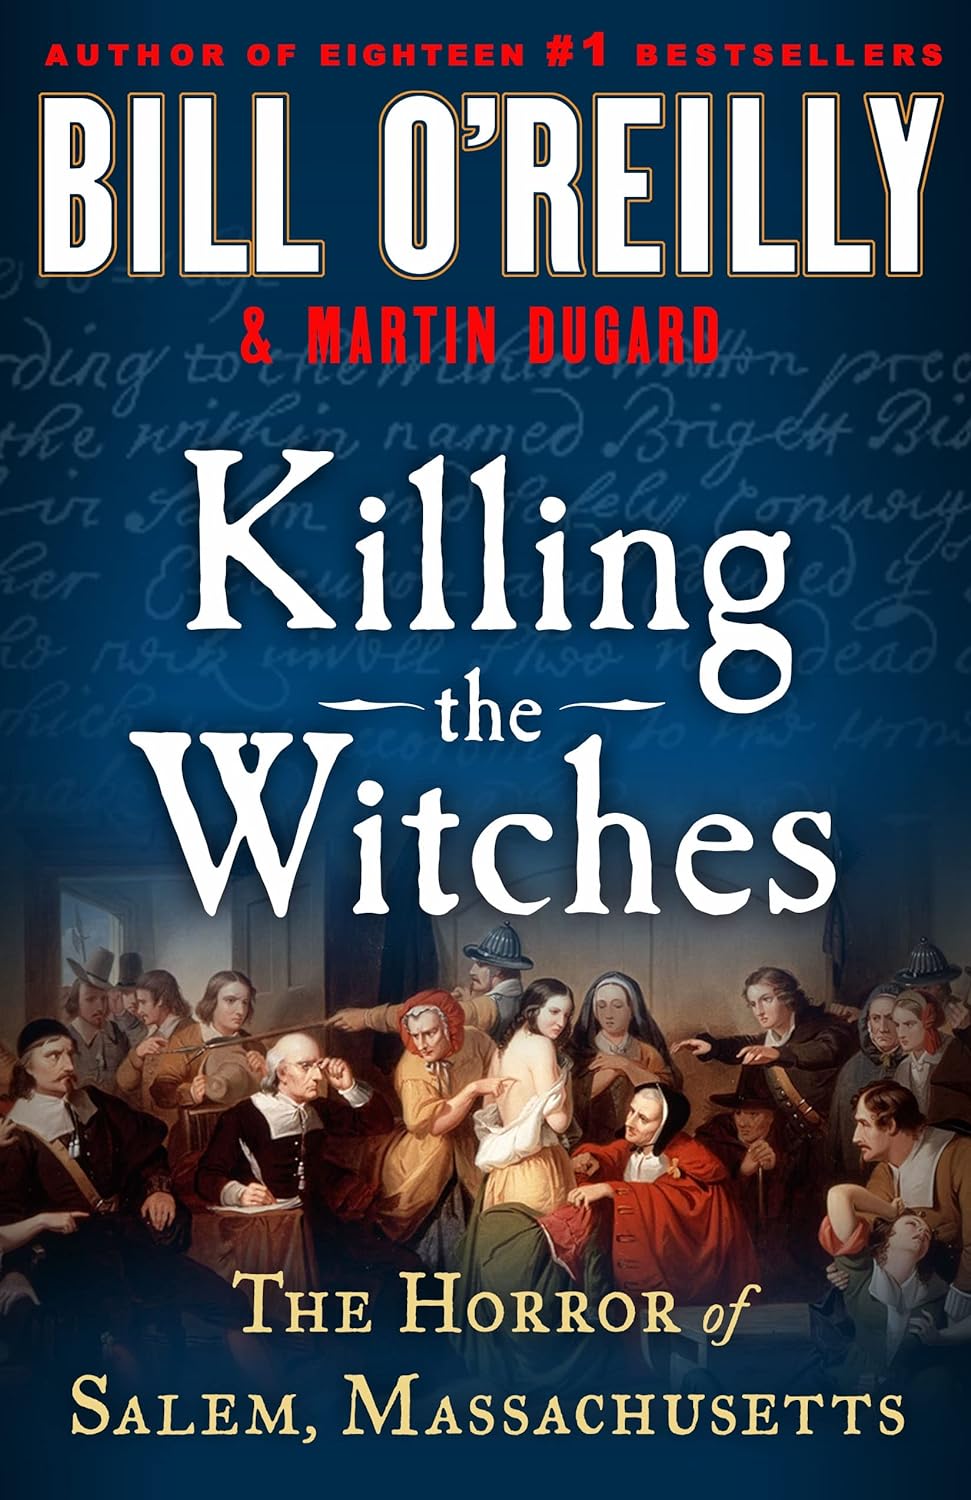 Image of "Killing the Witches"